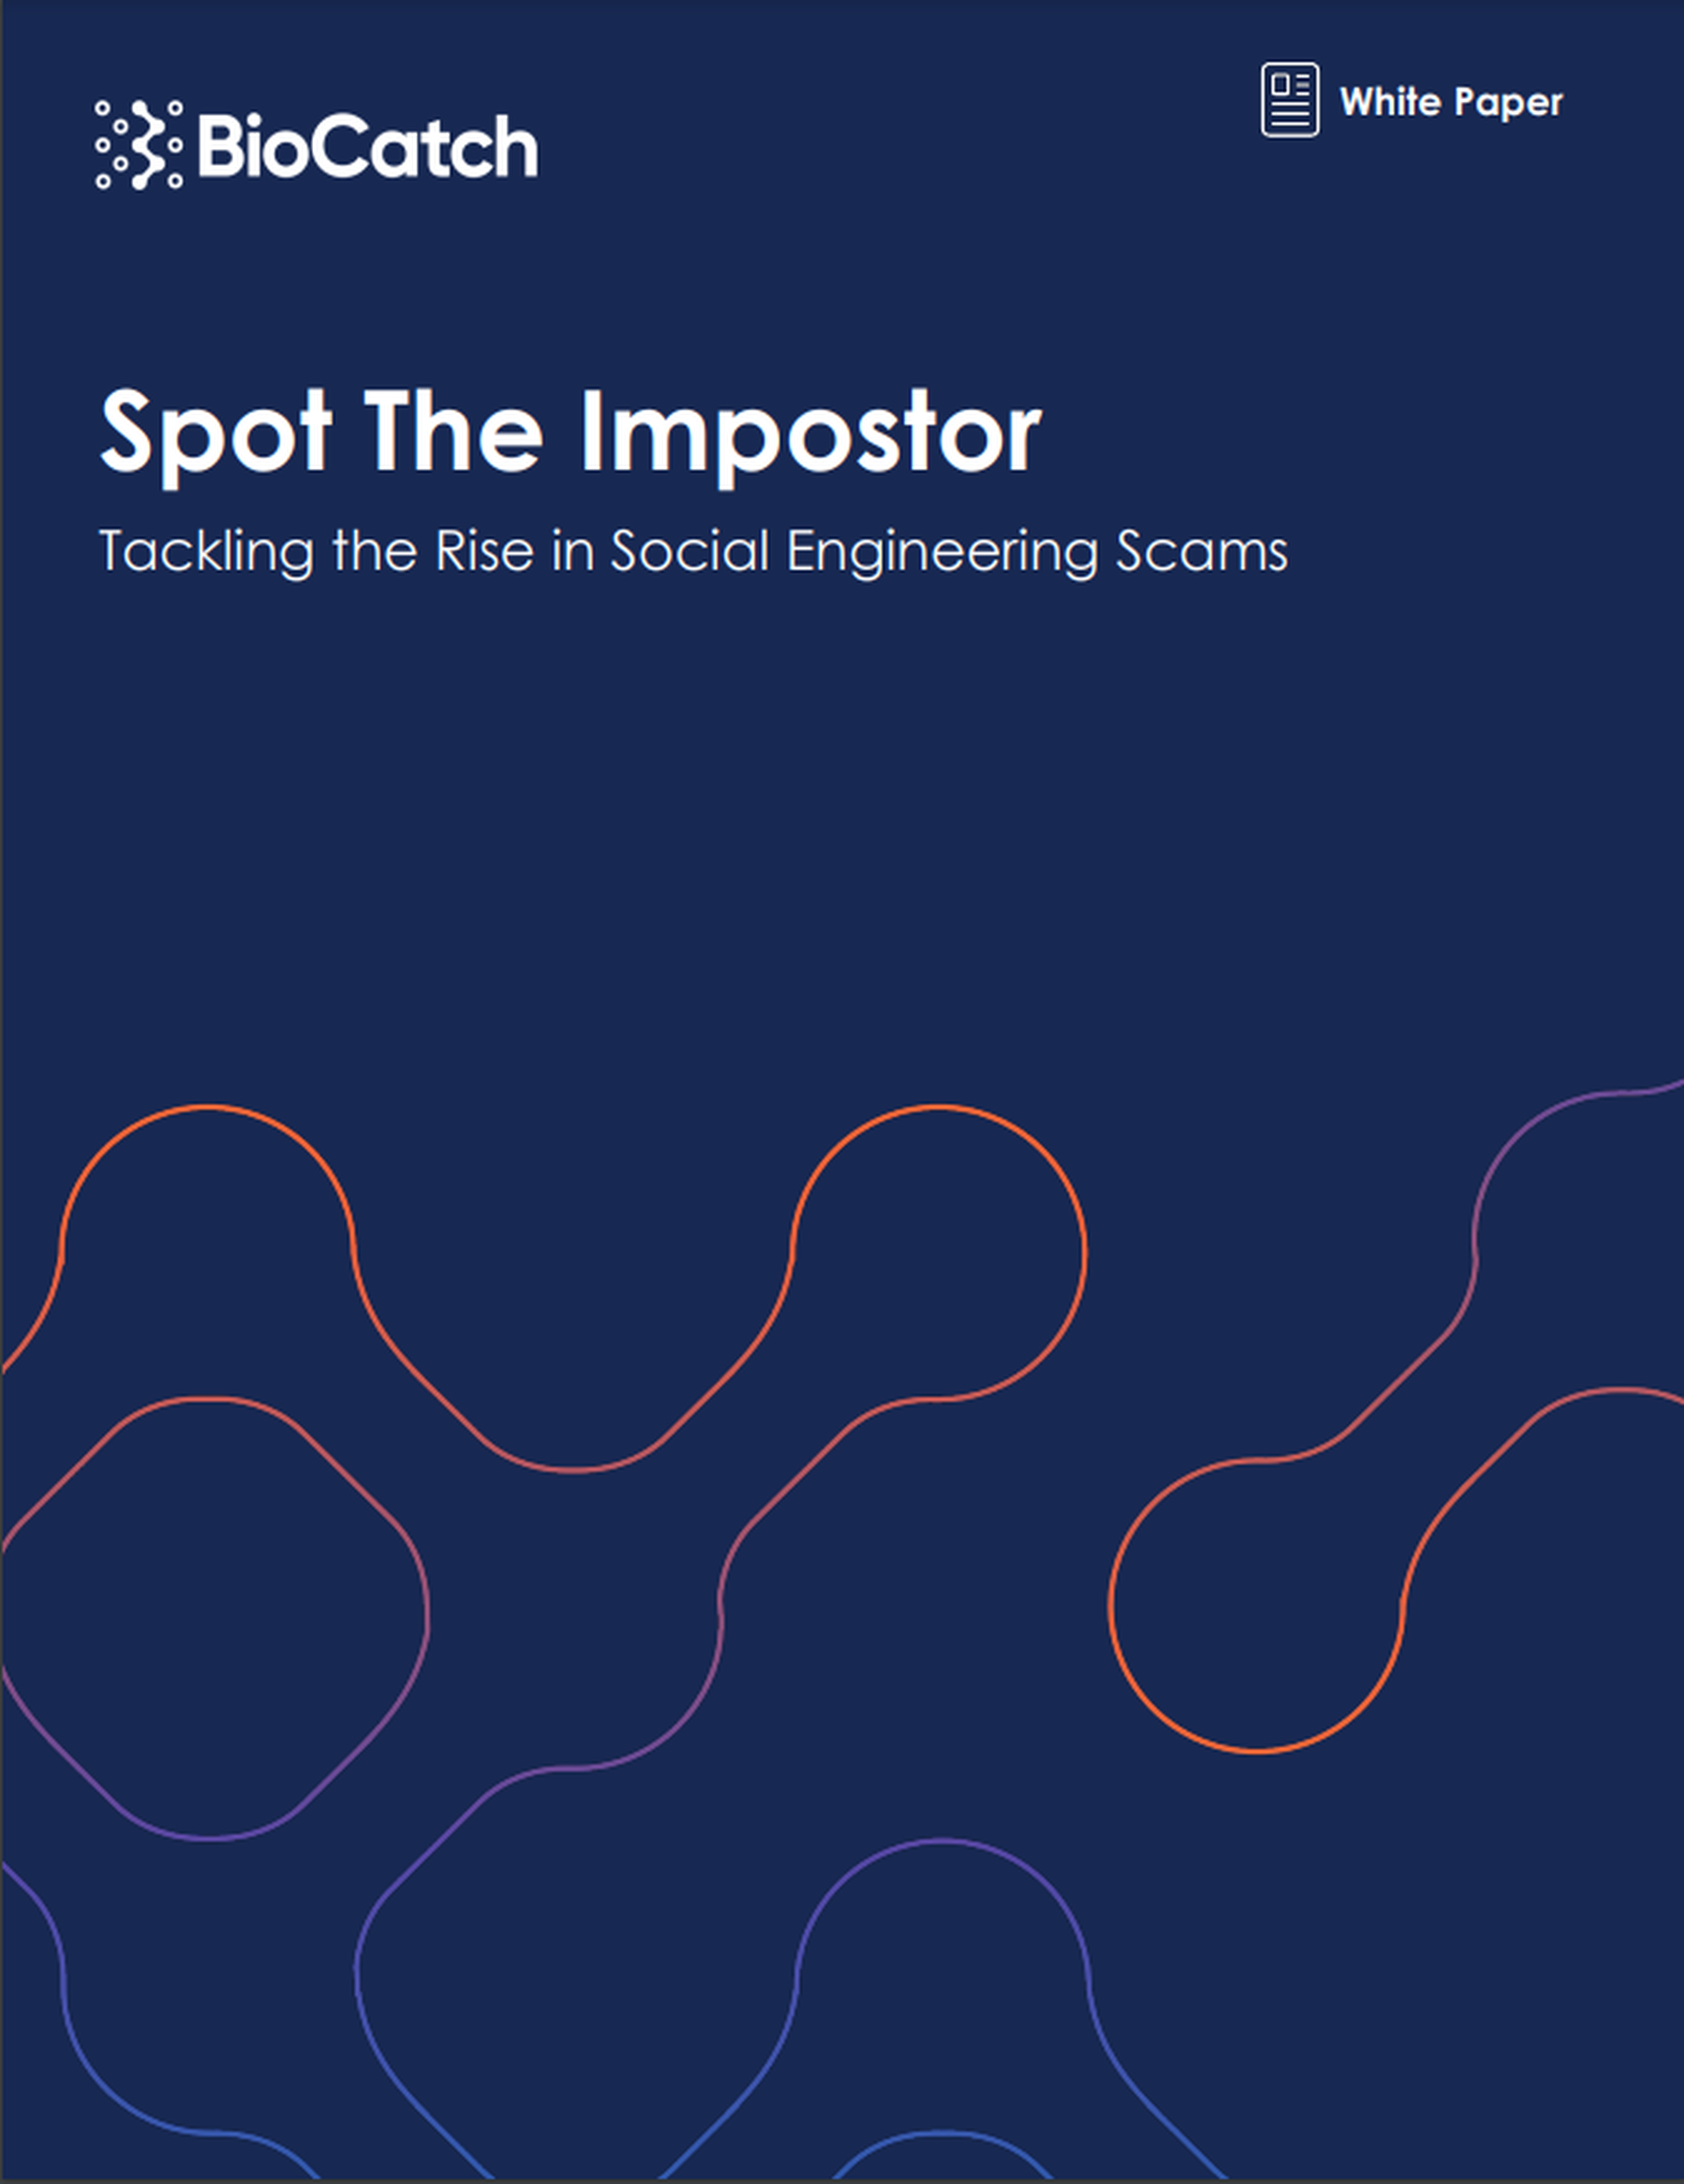 Spot the Impostor: Tackling the Rise in Social Engineering Scams